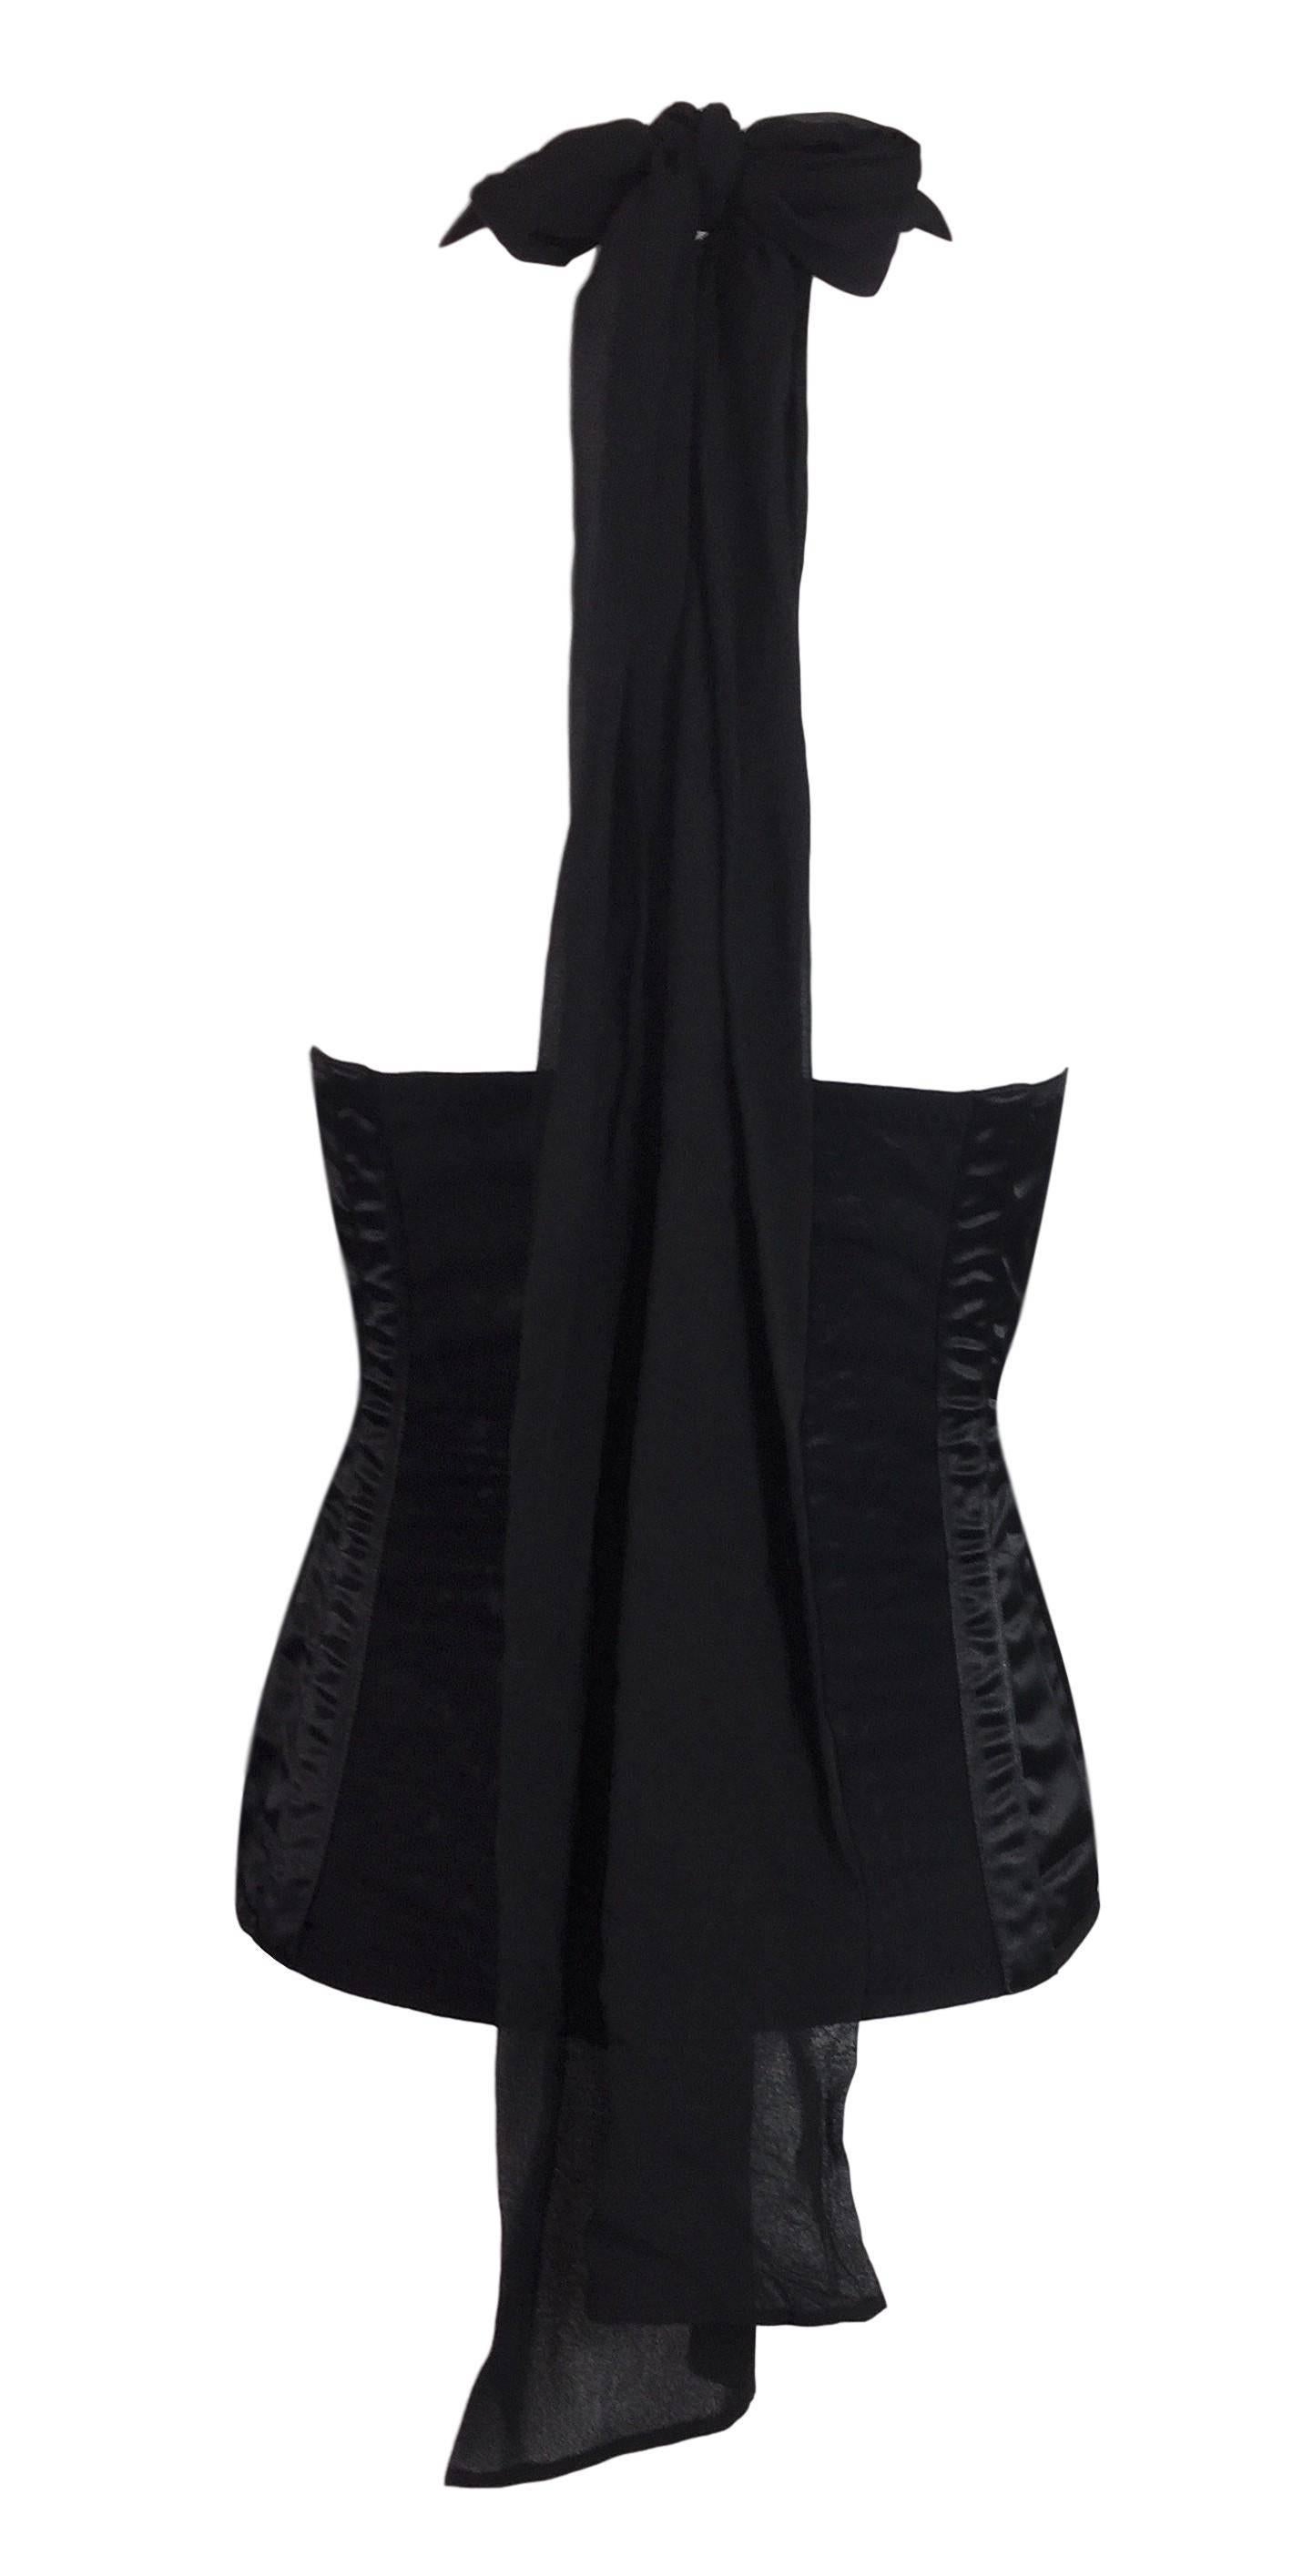 S/S 1995 Dolce & Gabbana Sheer Black Silk Plunging Corset Bustier Top In Good Condition In Yukon, OK